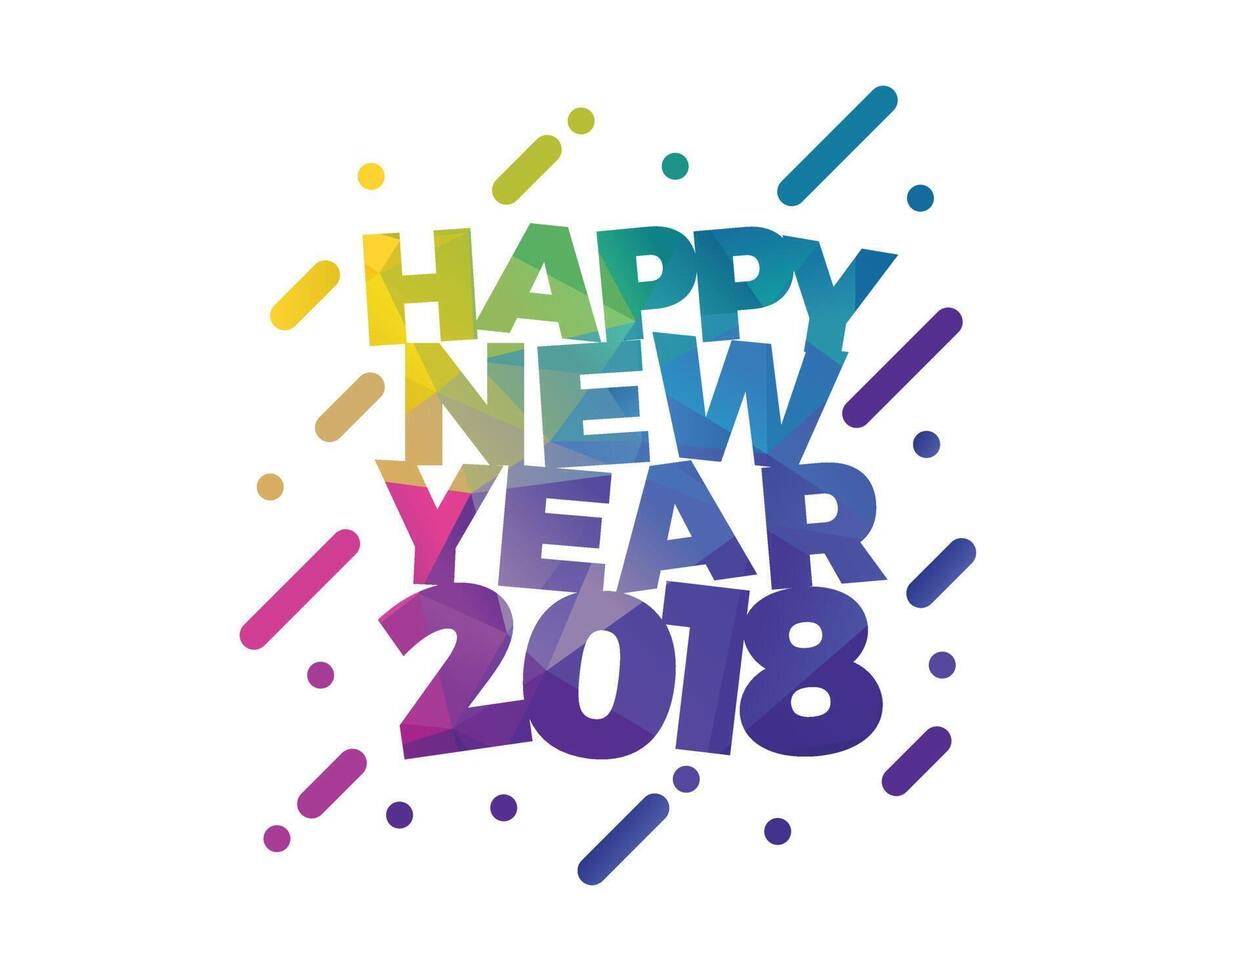 Happy New Year 2018 vector illustration greeting card design.